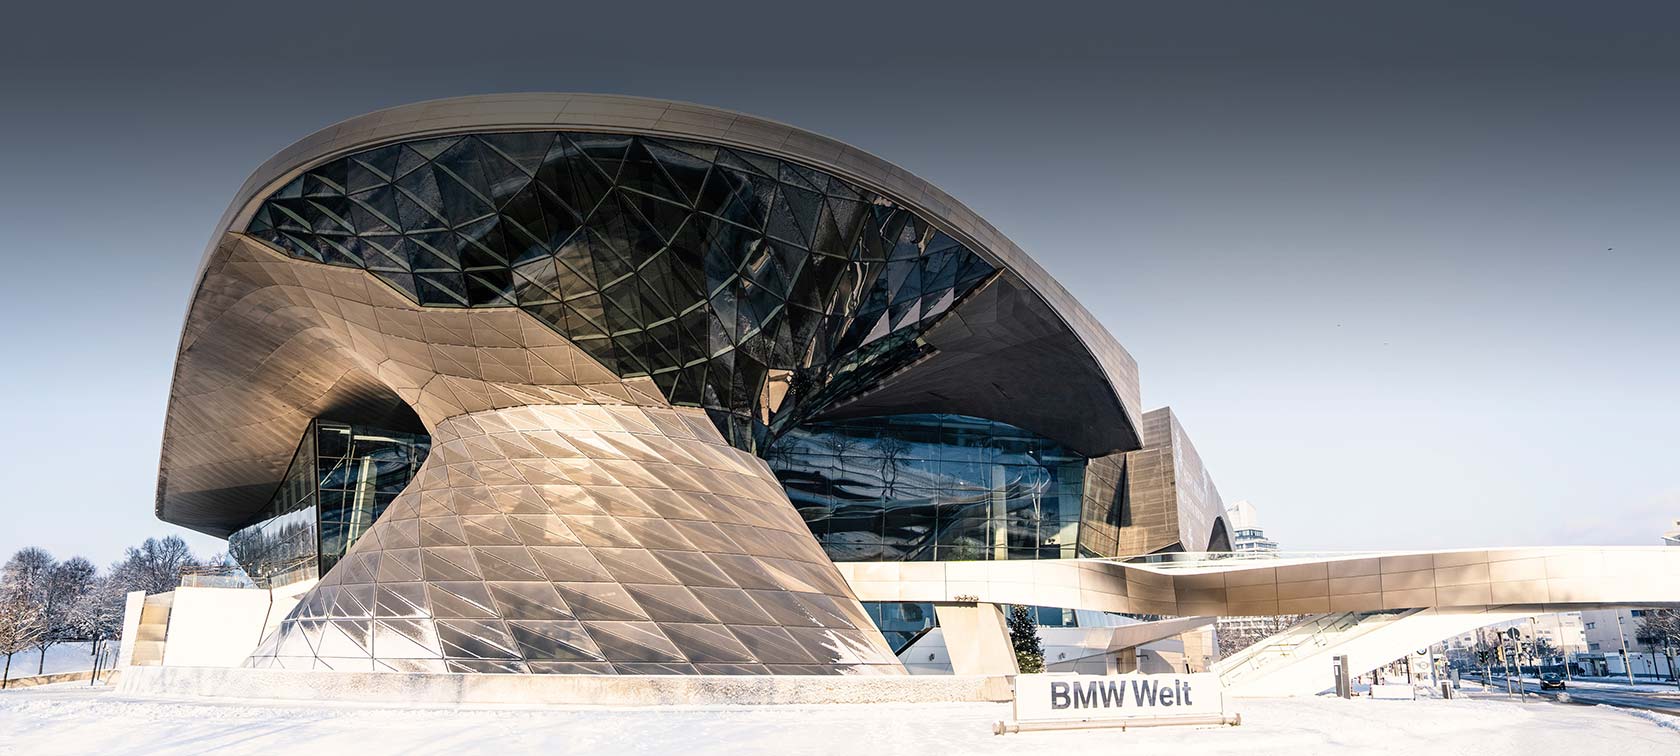 Exterior view of the Double Cone of BMW Welt illuminated in red